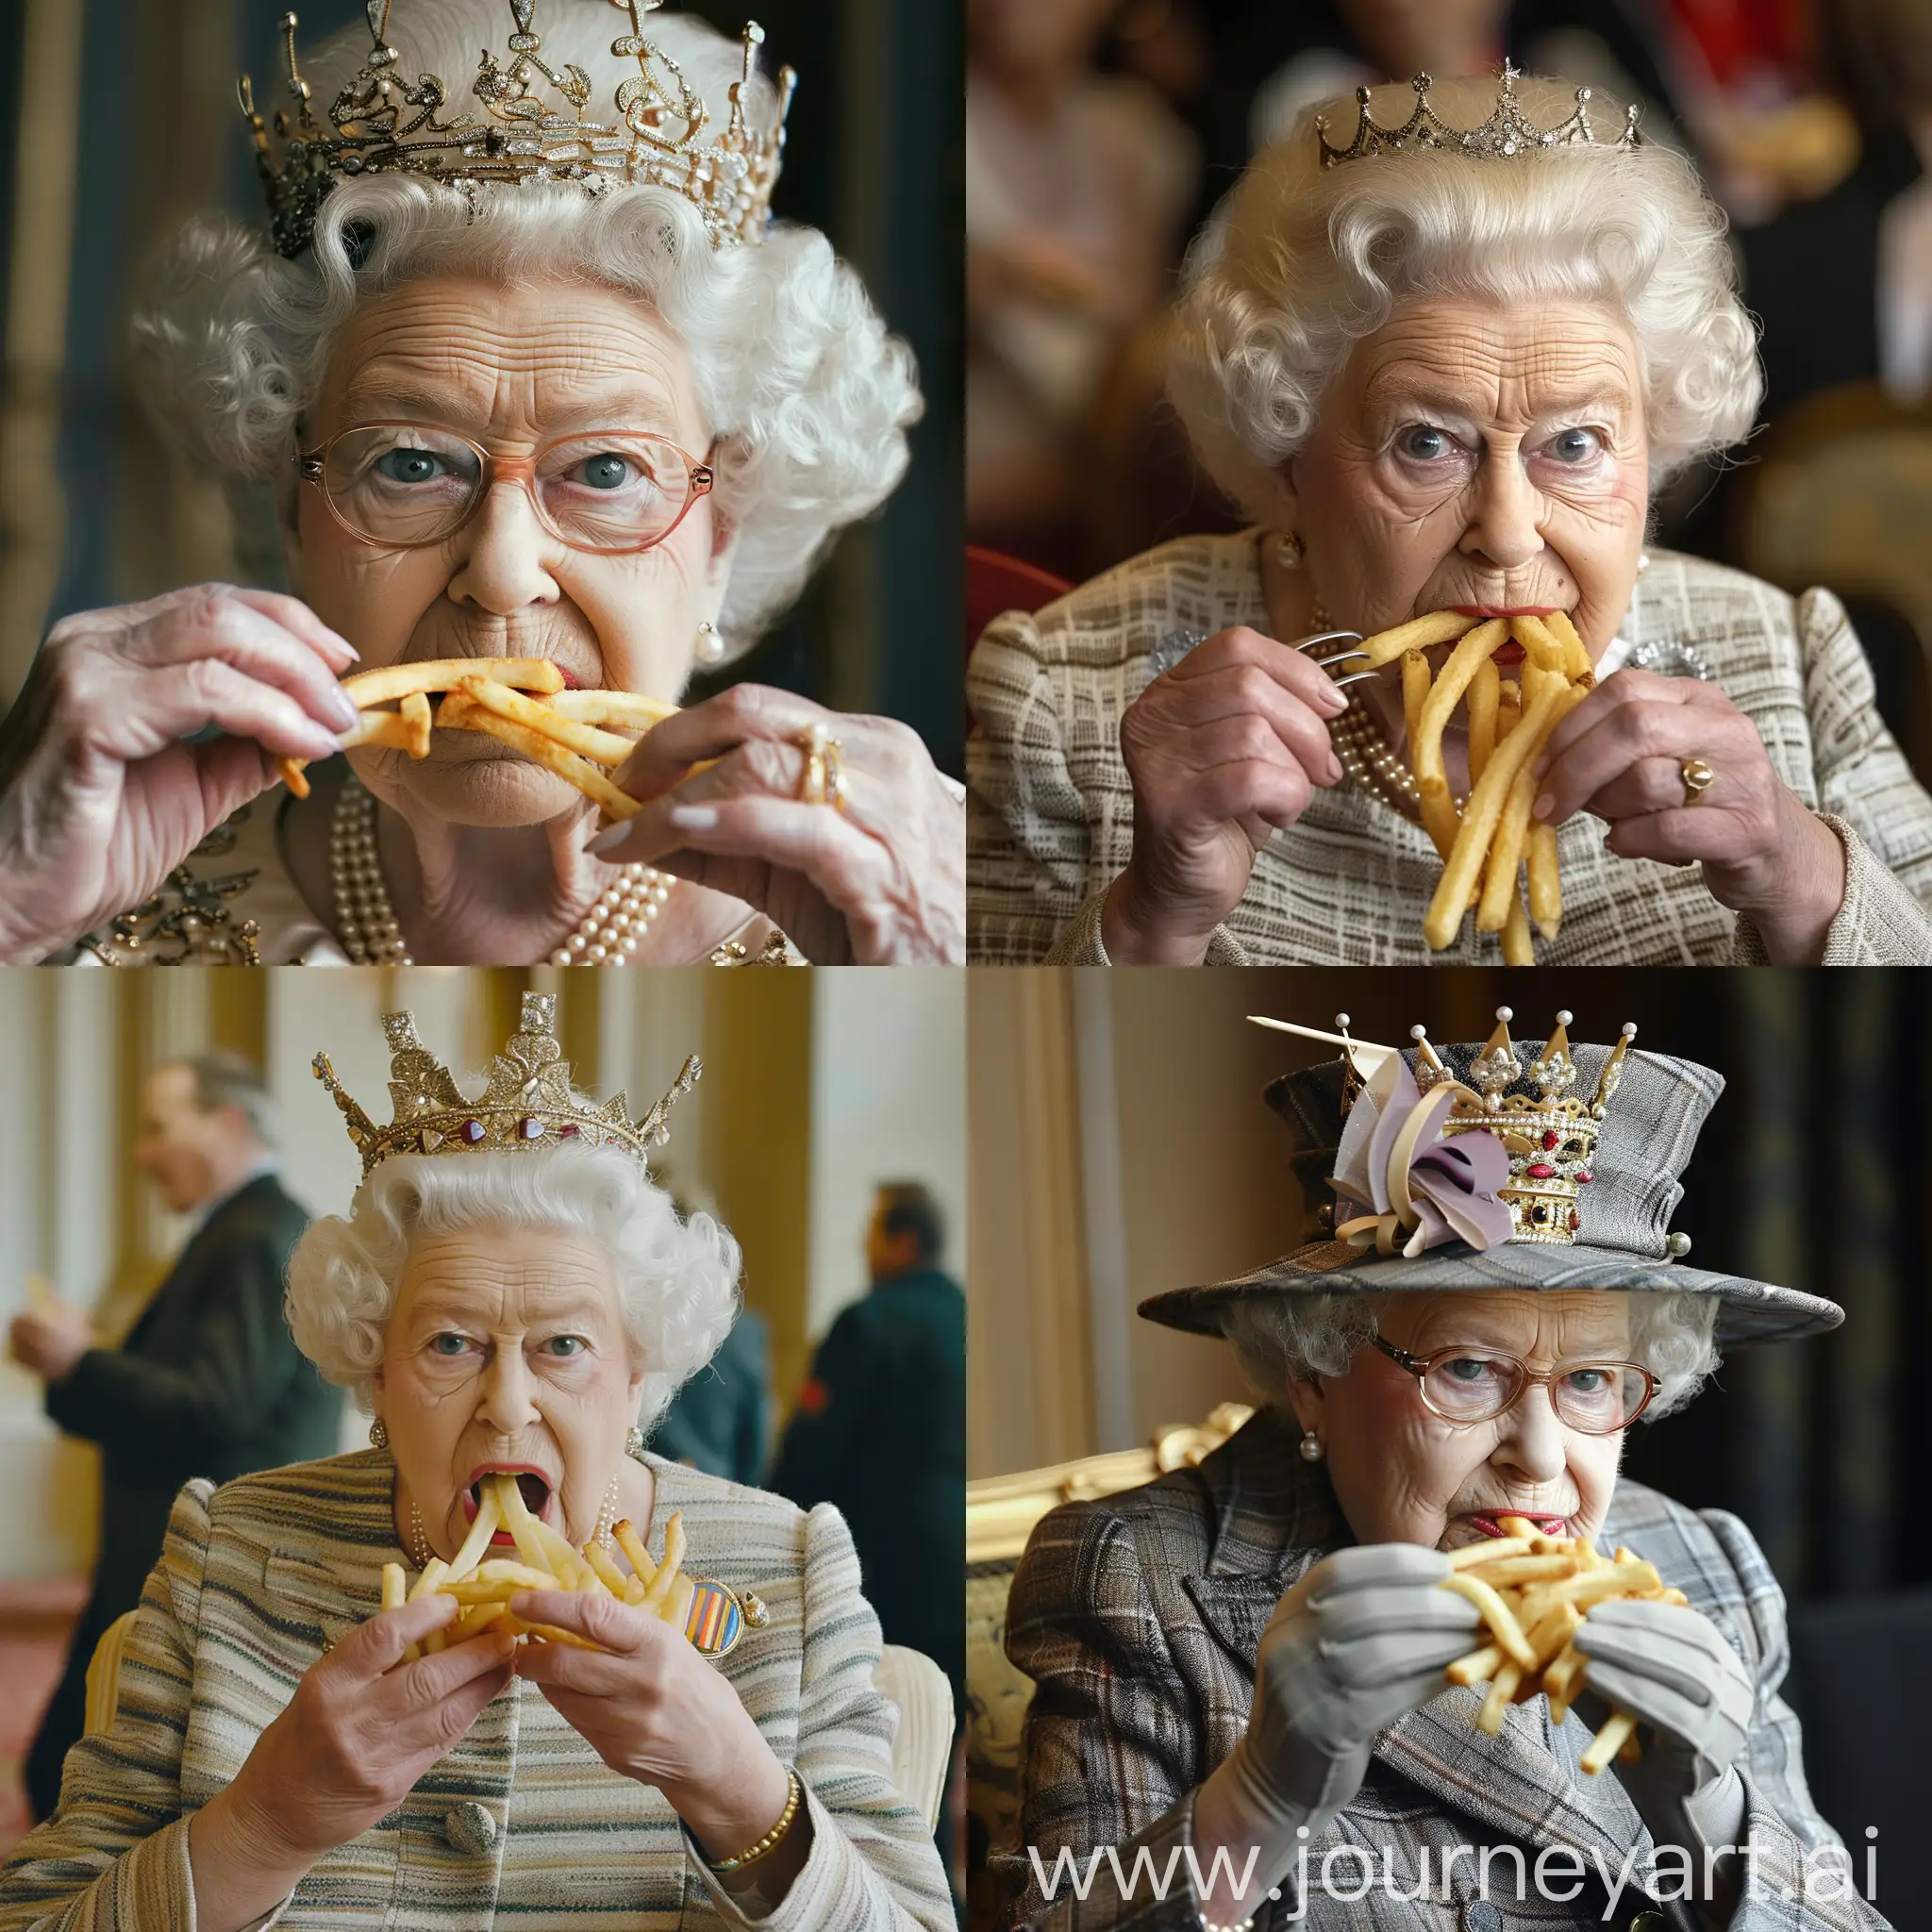 Royal-Indulgence-Queen-Enjoying-a-Plate-of-Fries